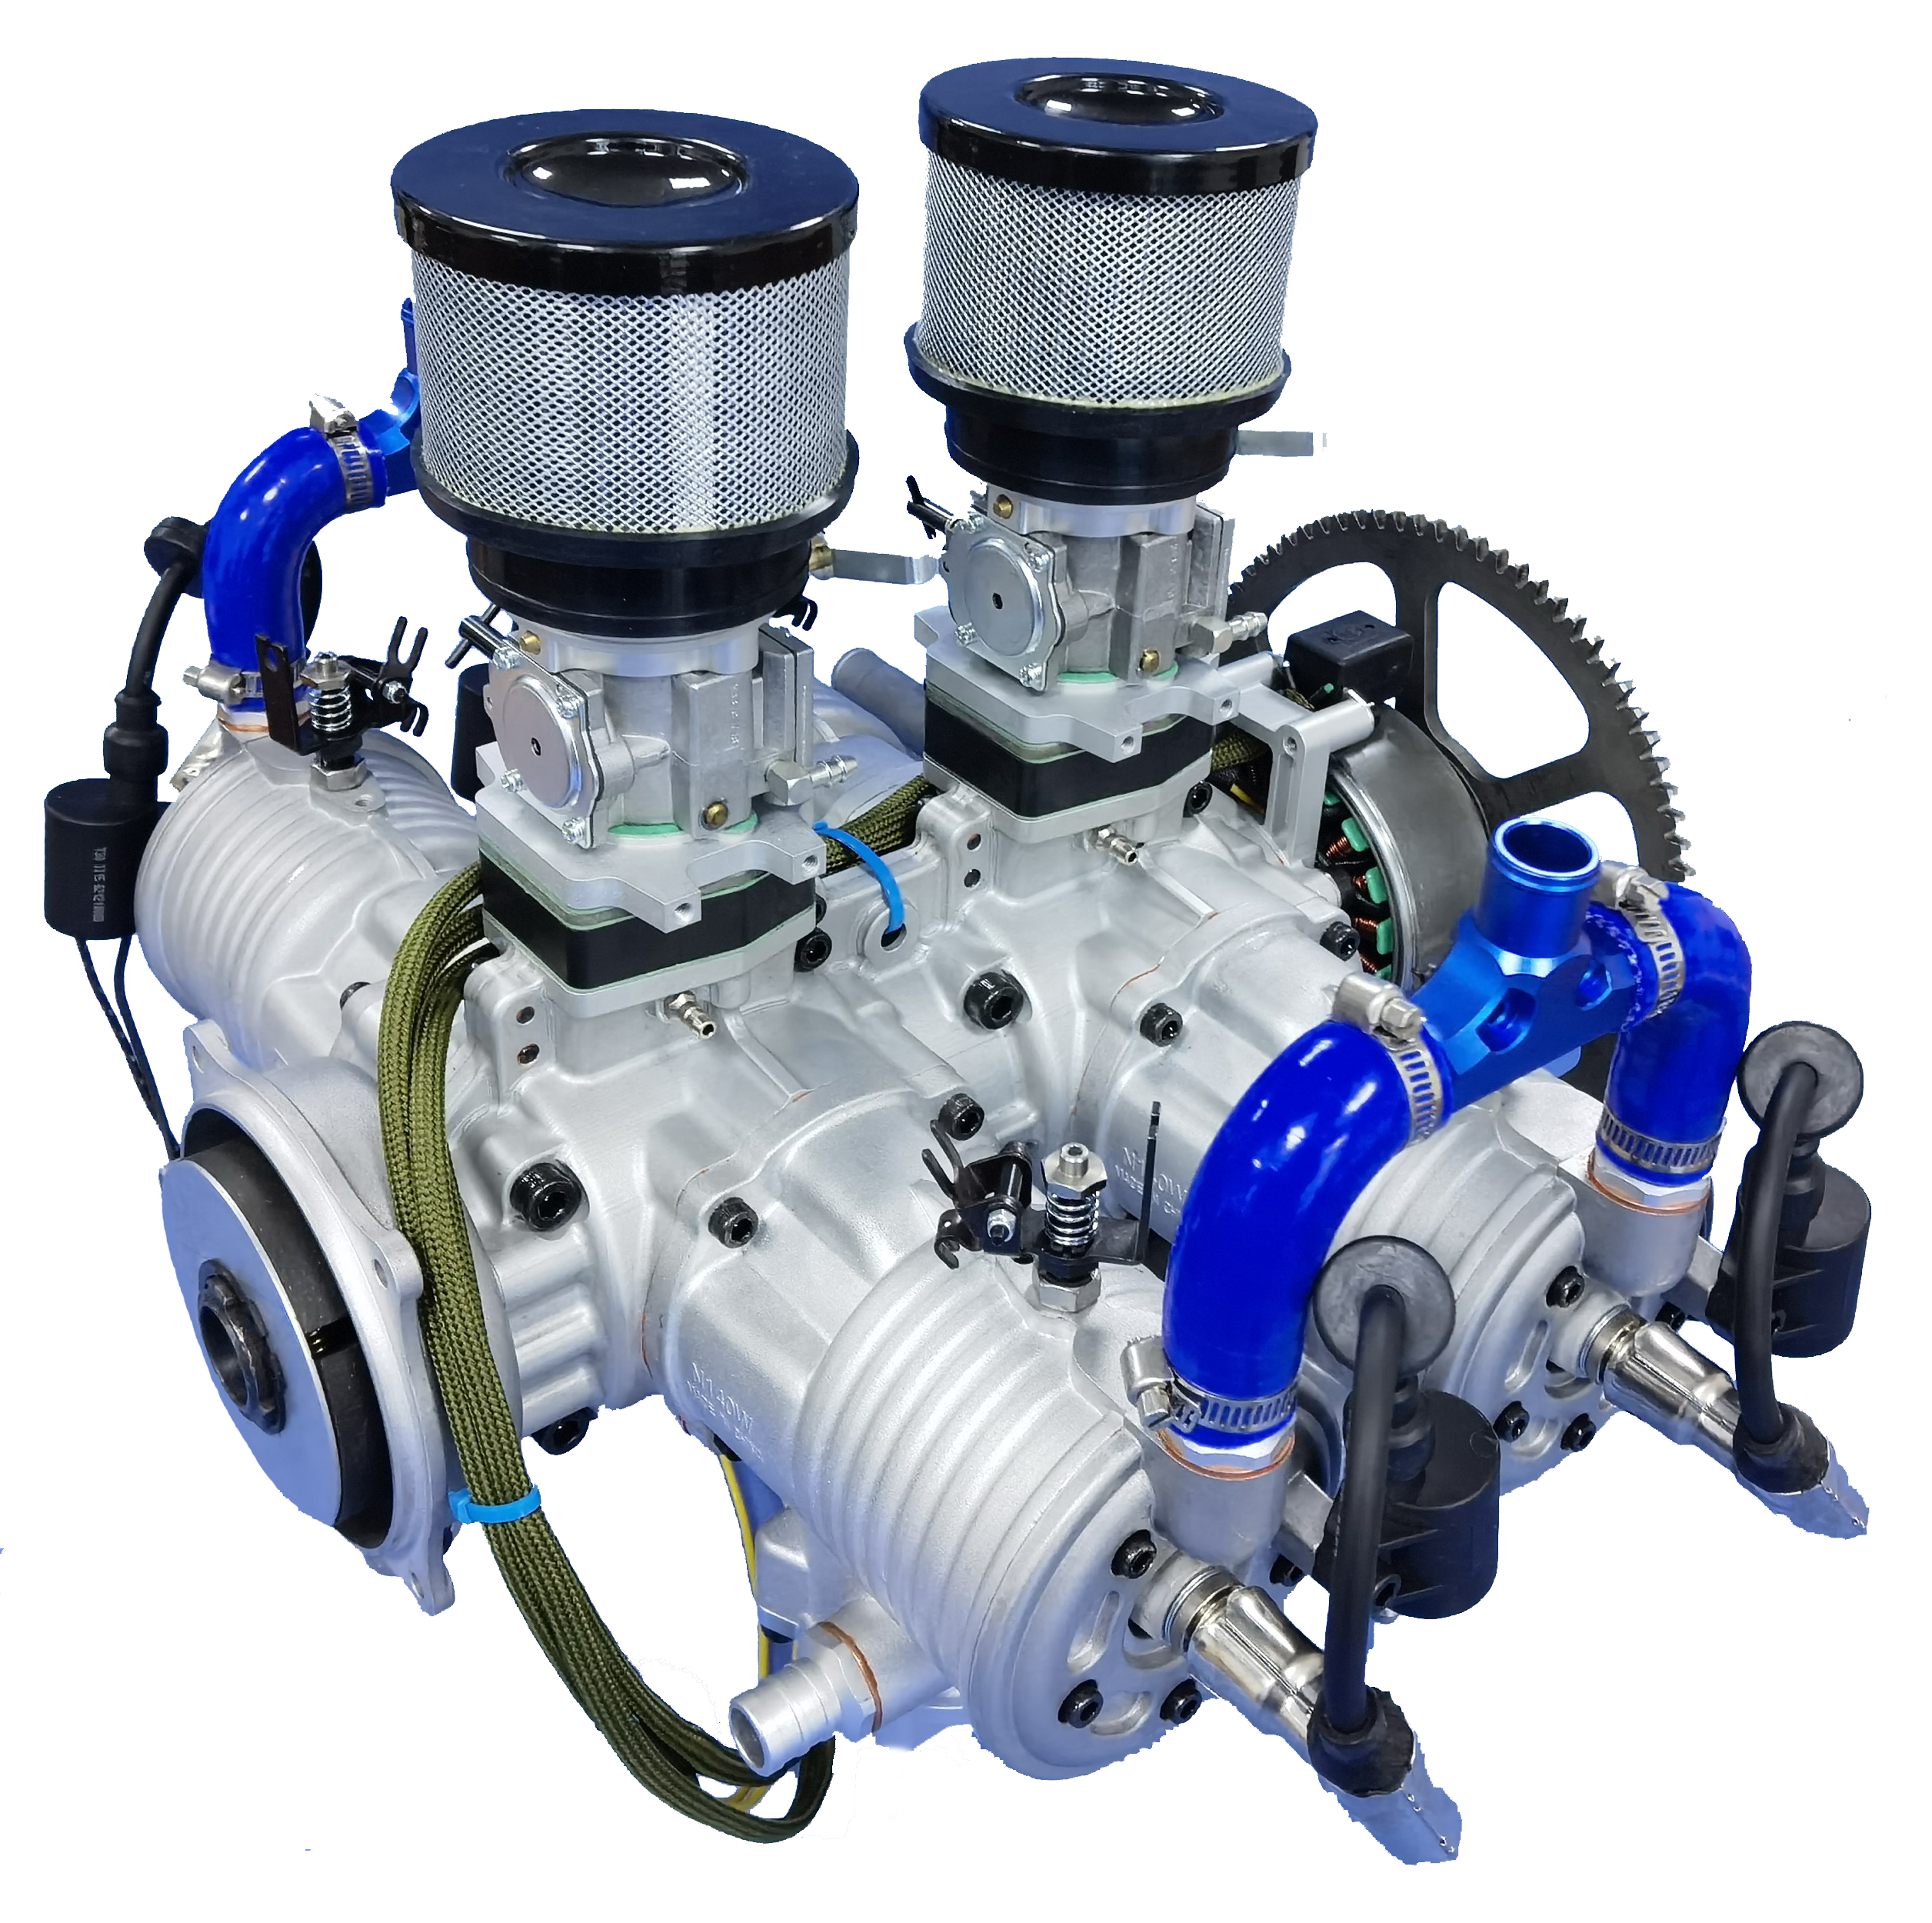 NGH WGT550 horizontally opposed four-cylinder 2-stroke liquid-cooling gasoline engine